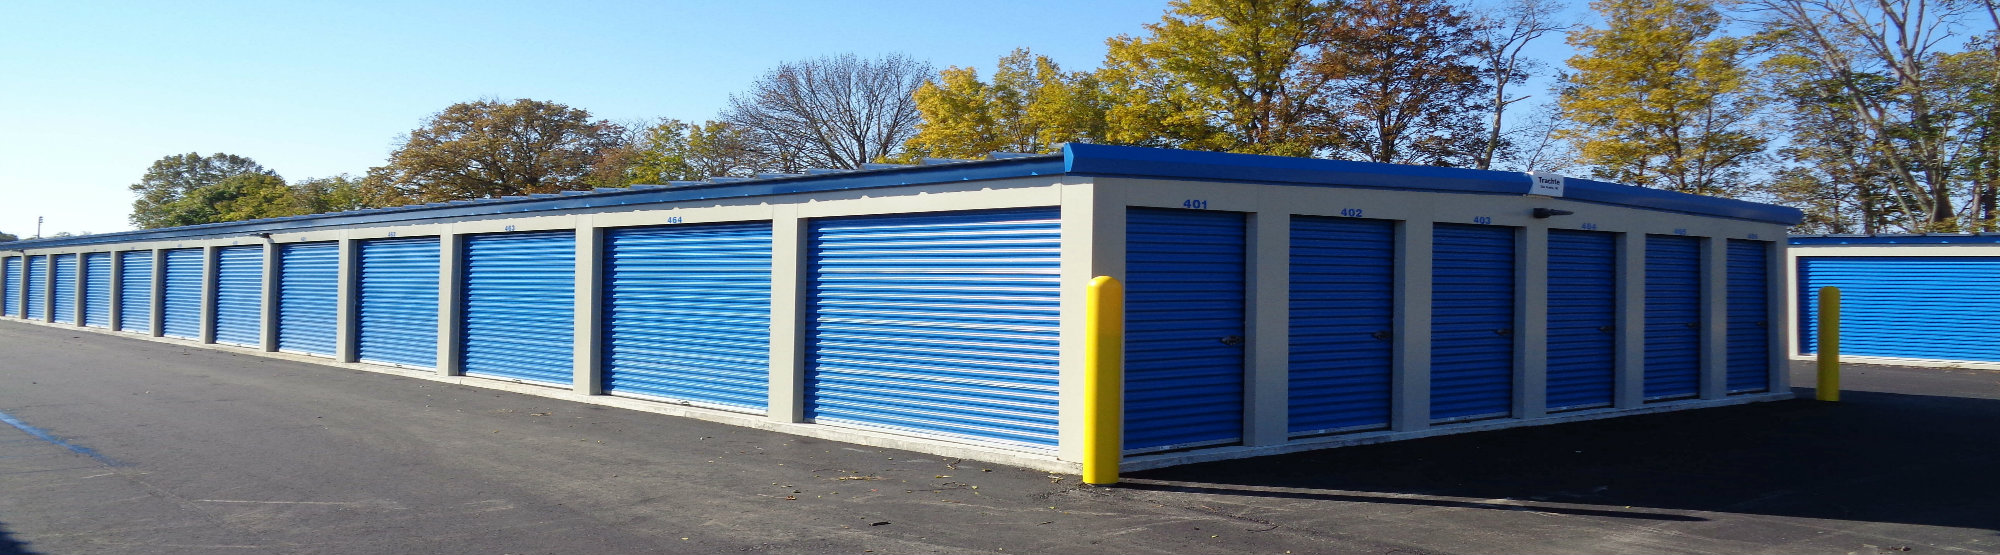 Self storage units in Rushville, IN